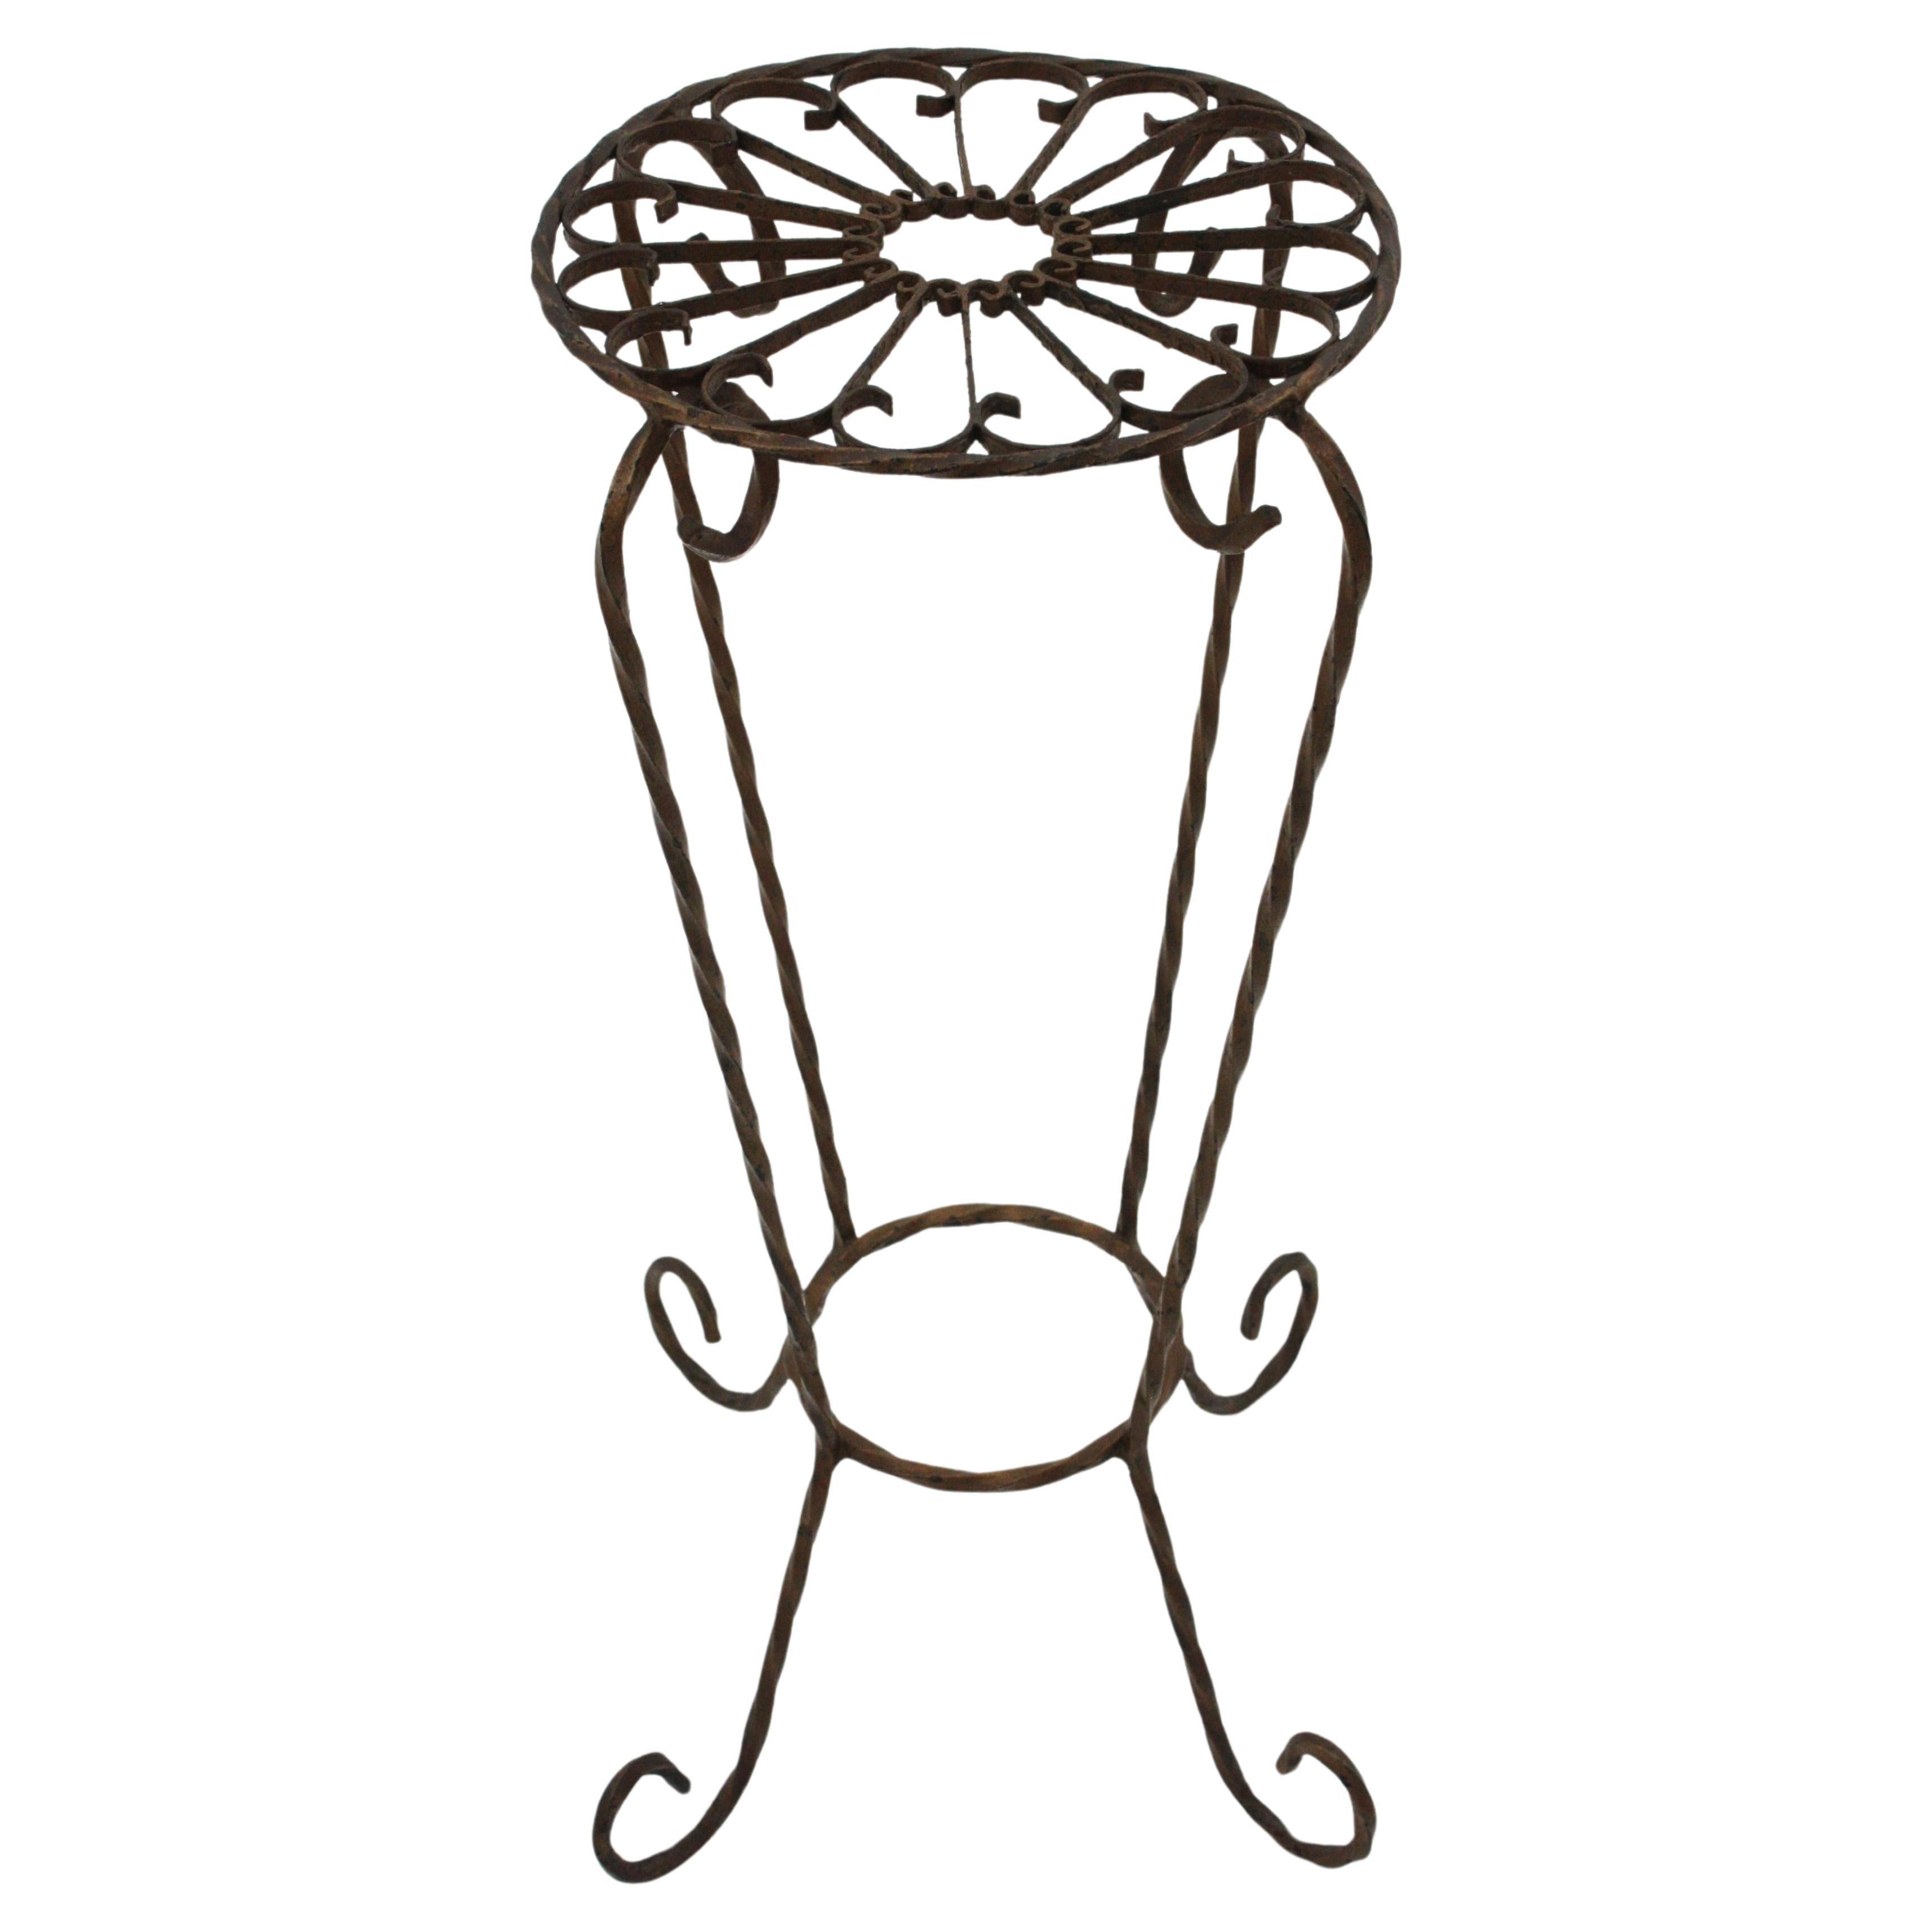 Spanish Wrought Iron Side Table Gueridon / Drinks Table with Scrollwork Top